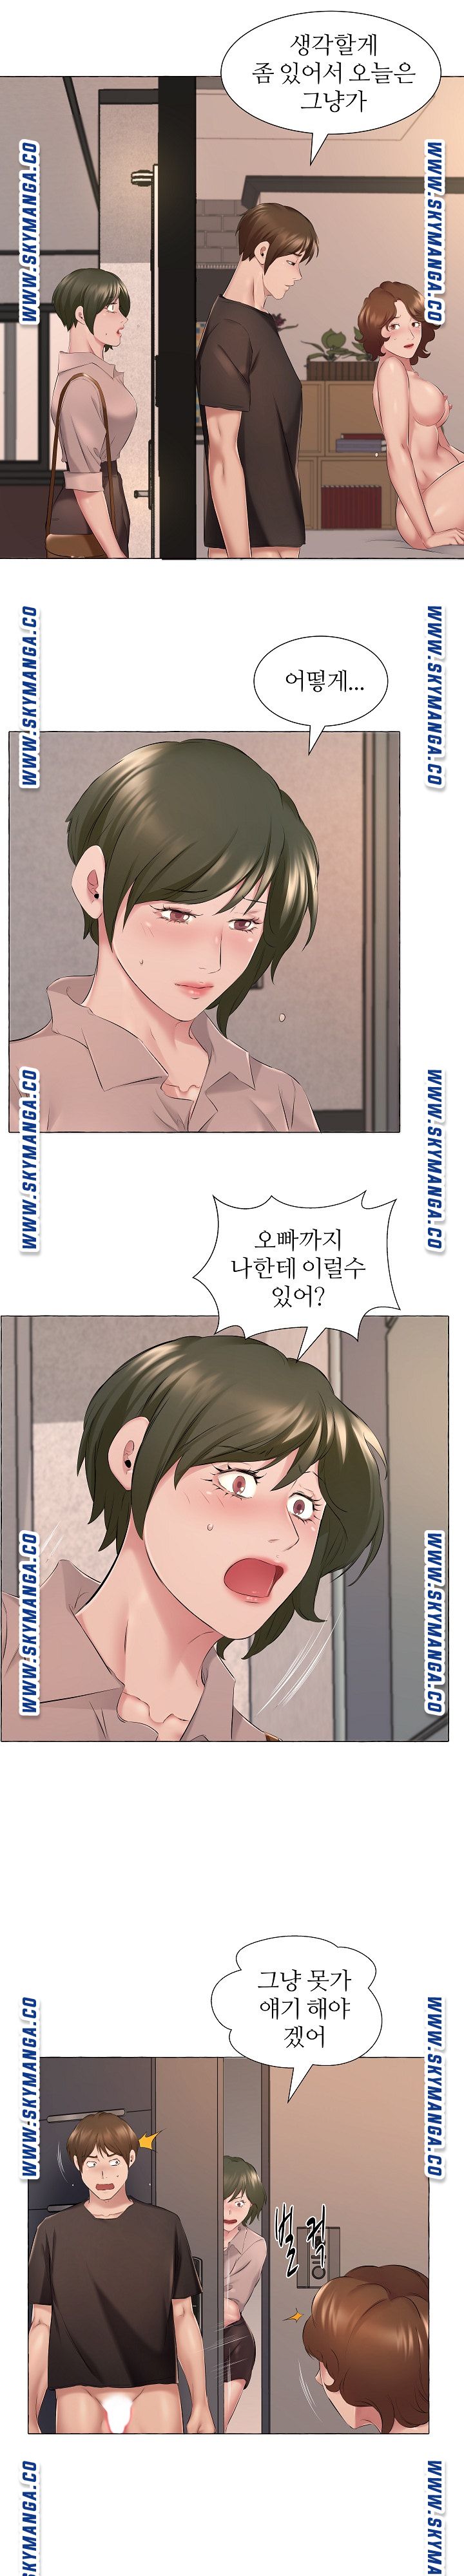 One Room Hotel Raw - Chapter 6 Page 18